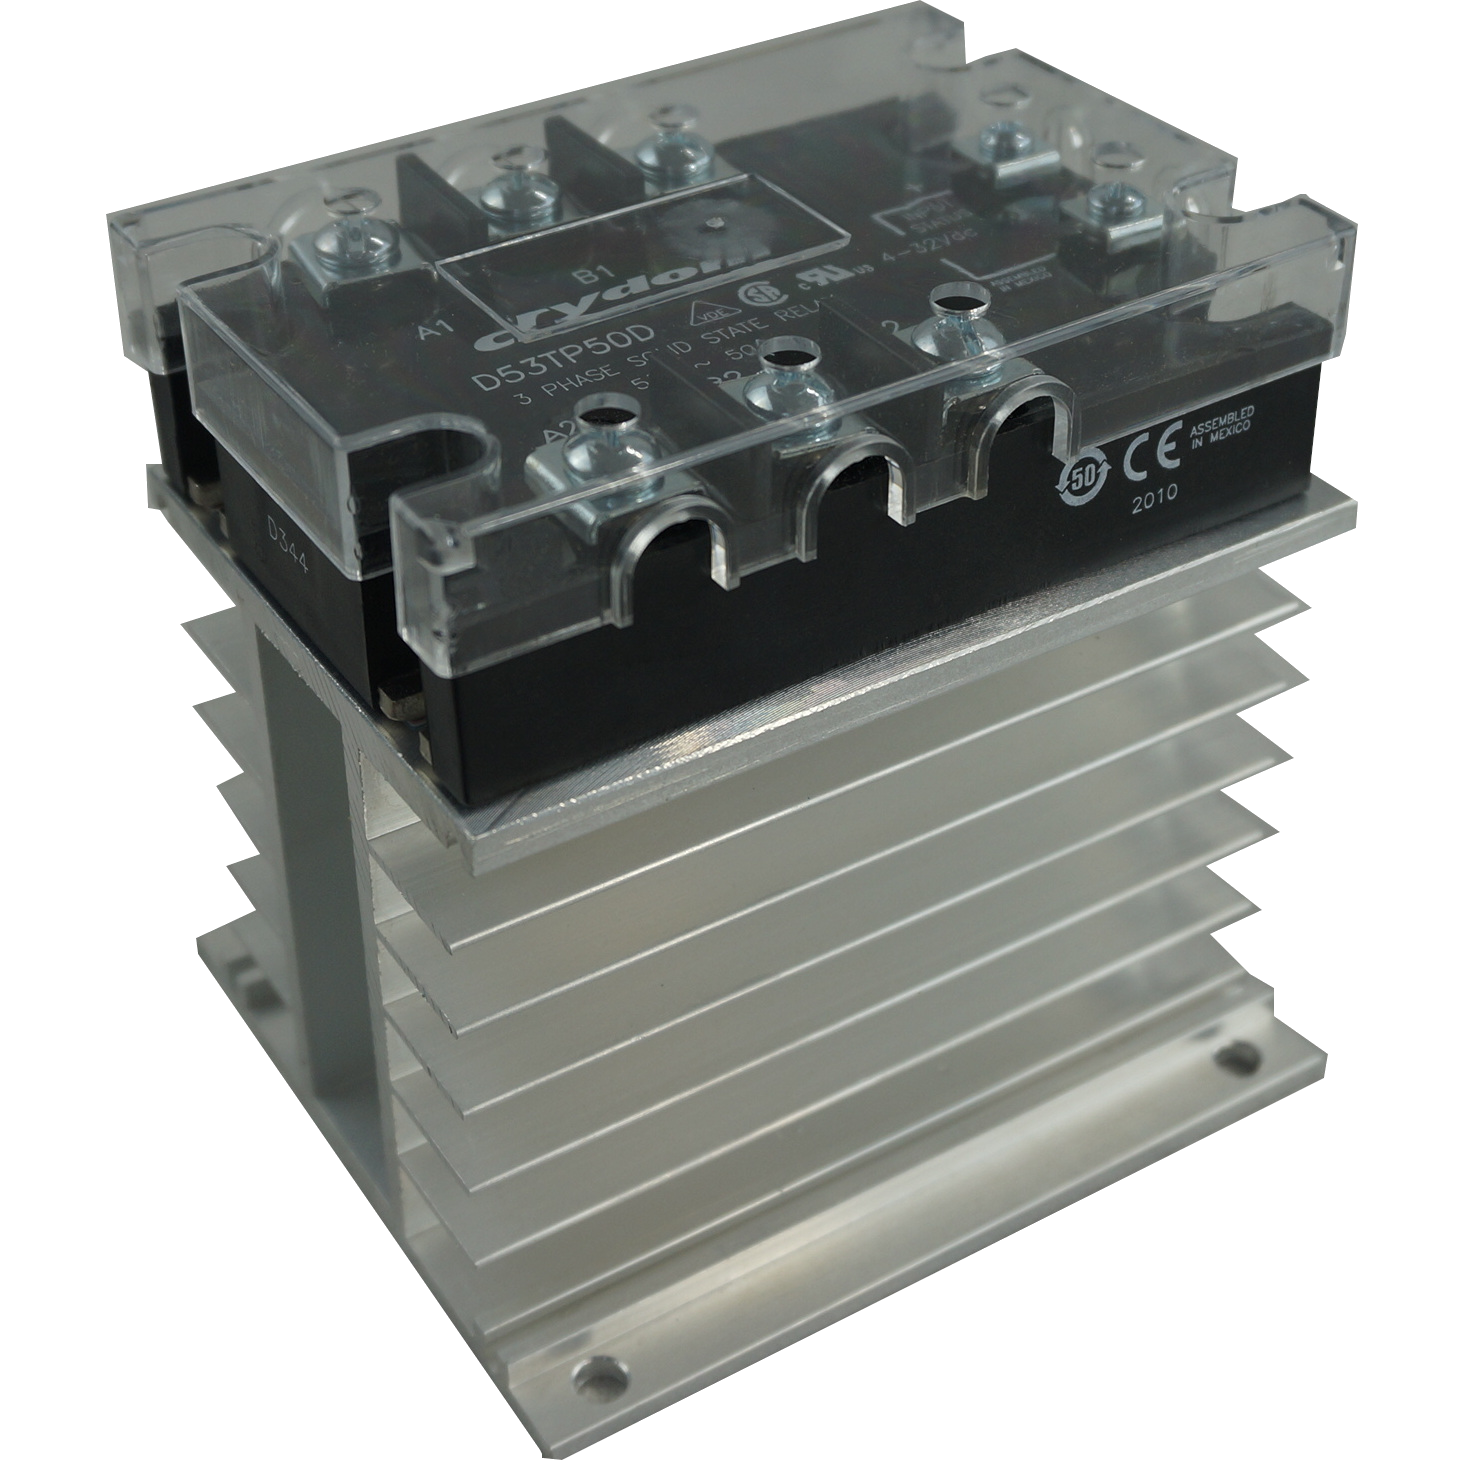 A53TP50D + HS212, Solid State Relay, and Heatsink Assembly, 3 Phase 90-280VAC Control, 20 Amp per phase @ 40 Deg C, 48-530VAC Load, LED Status Indicator